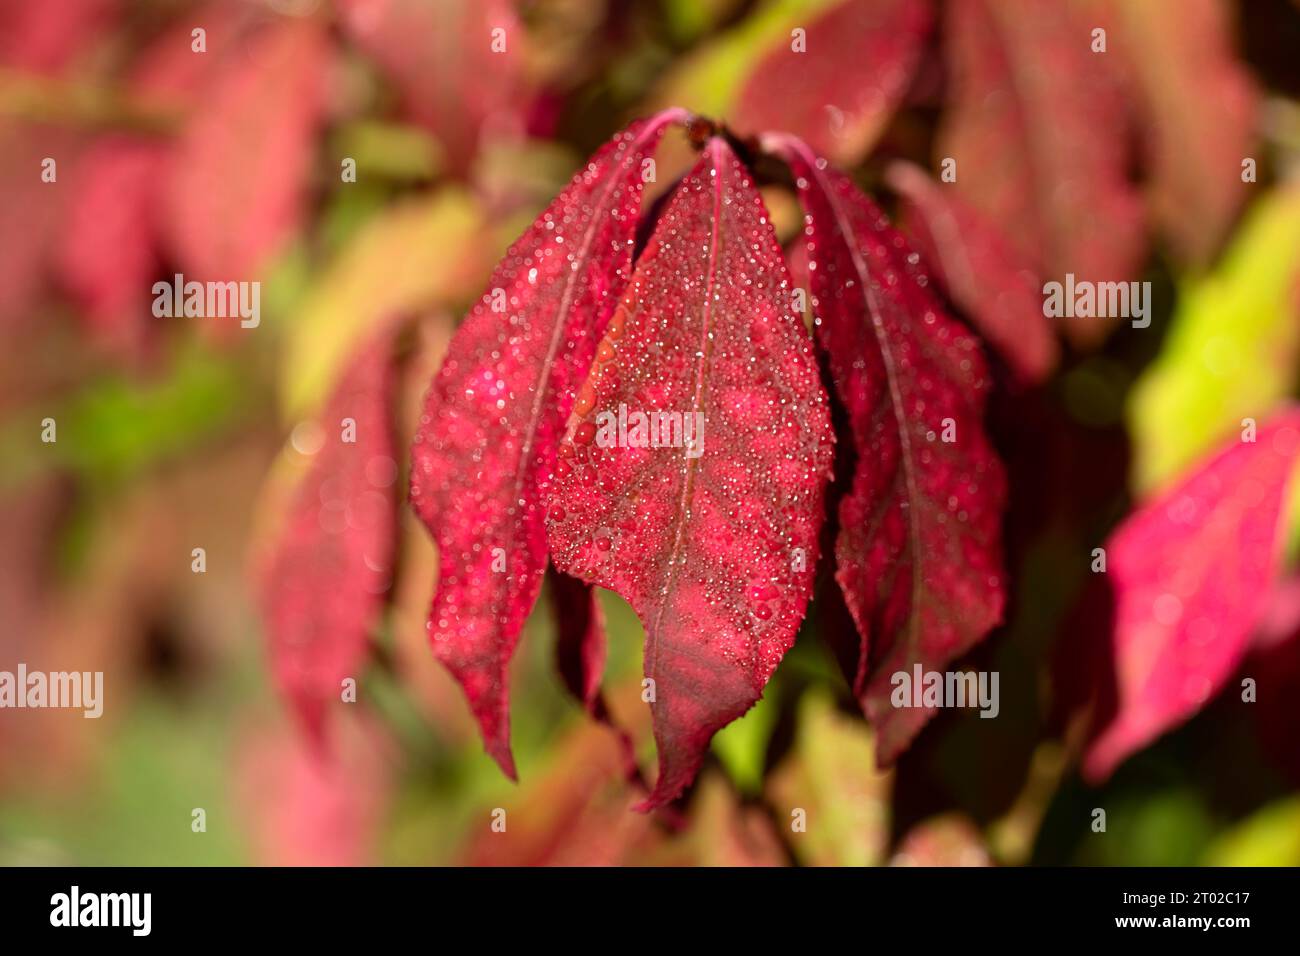 Red leaves of Winged euonymus (Euonymus alatus) in the autumn garden. Close up view. Stock Photo